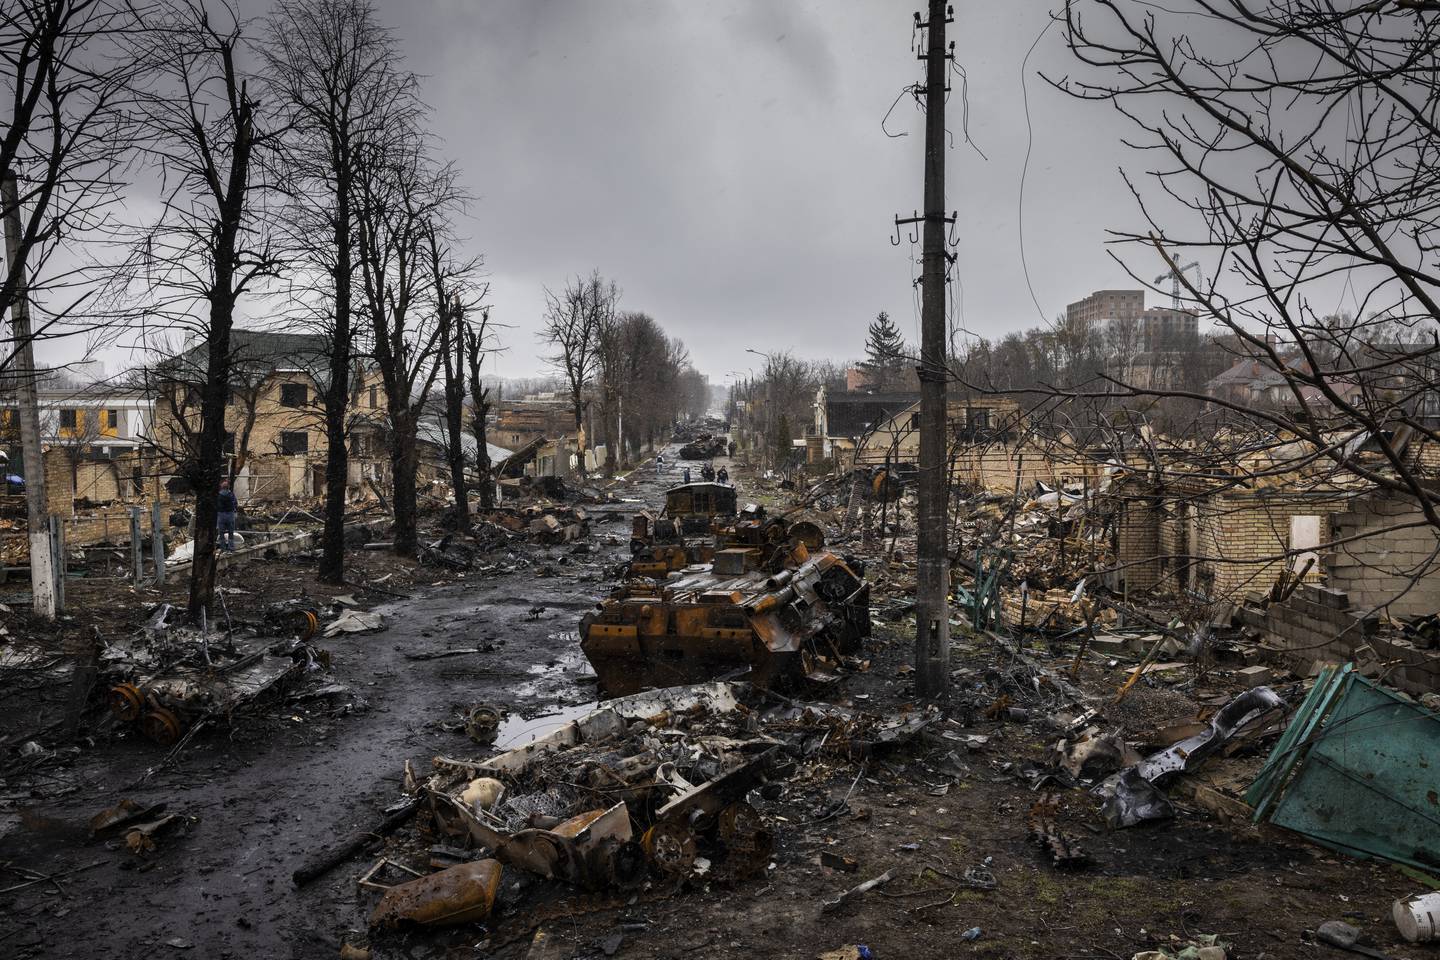 Damage in the streets of Bucha, Ukraine after Russian soldiers retreated, on April 3rd, 2022. Hours before Russian troops began withdrawing from the suburban town, a Russian soldier left a trail of blood and devastated lives in a last paroxysm of violence. Photograph: Ivor Prickett/The New York Times